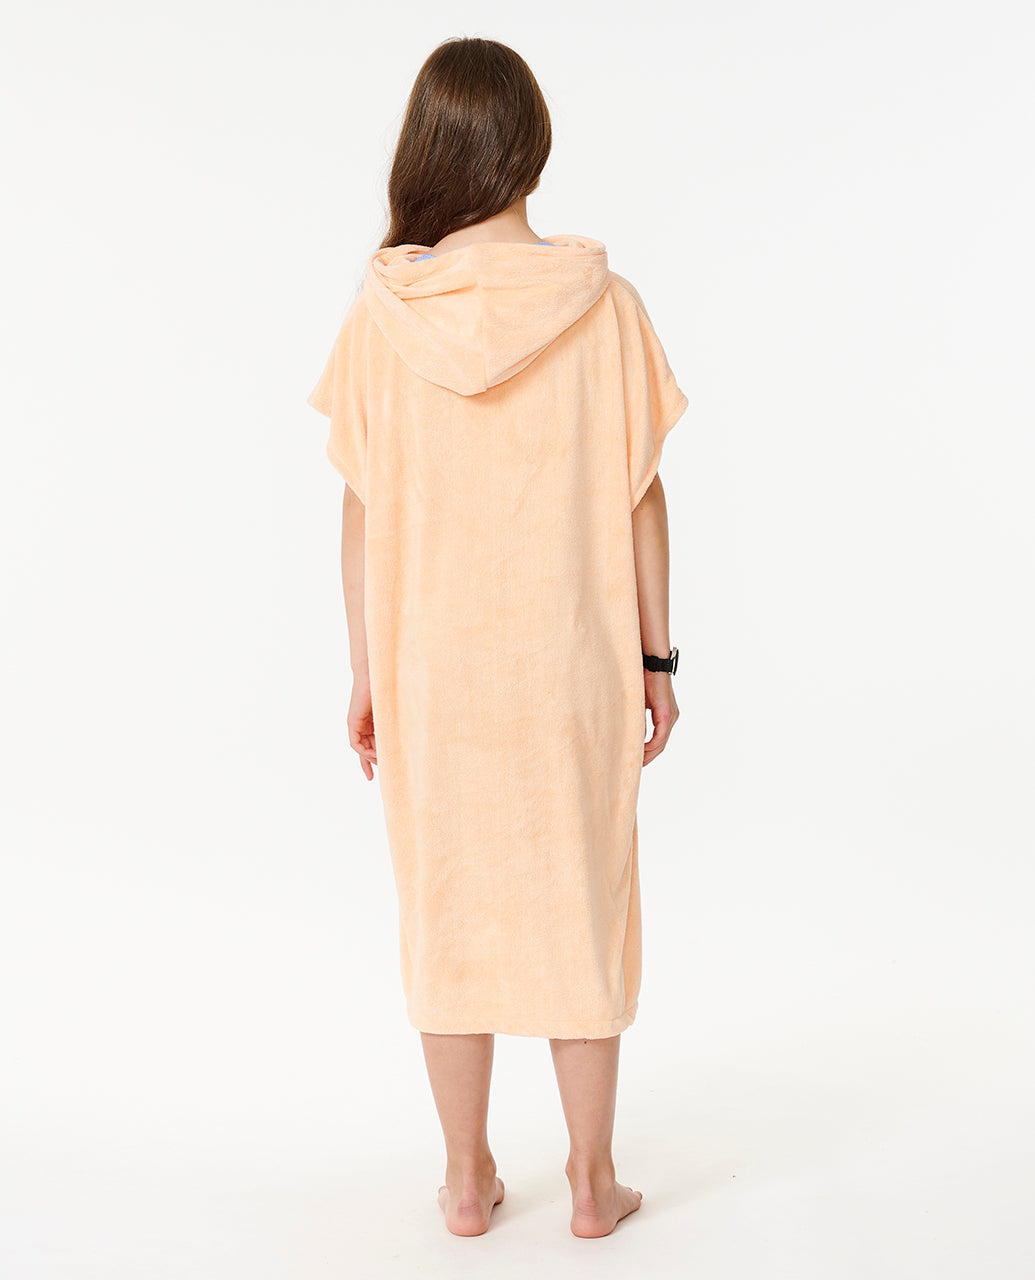 CLASSIC SURF HOODED TOWEL-GIRL